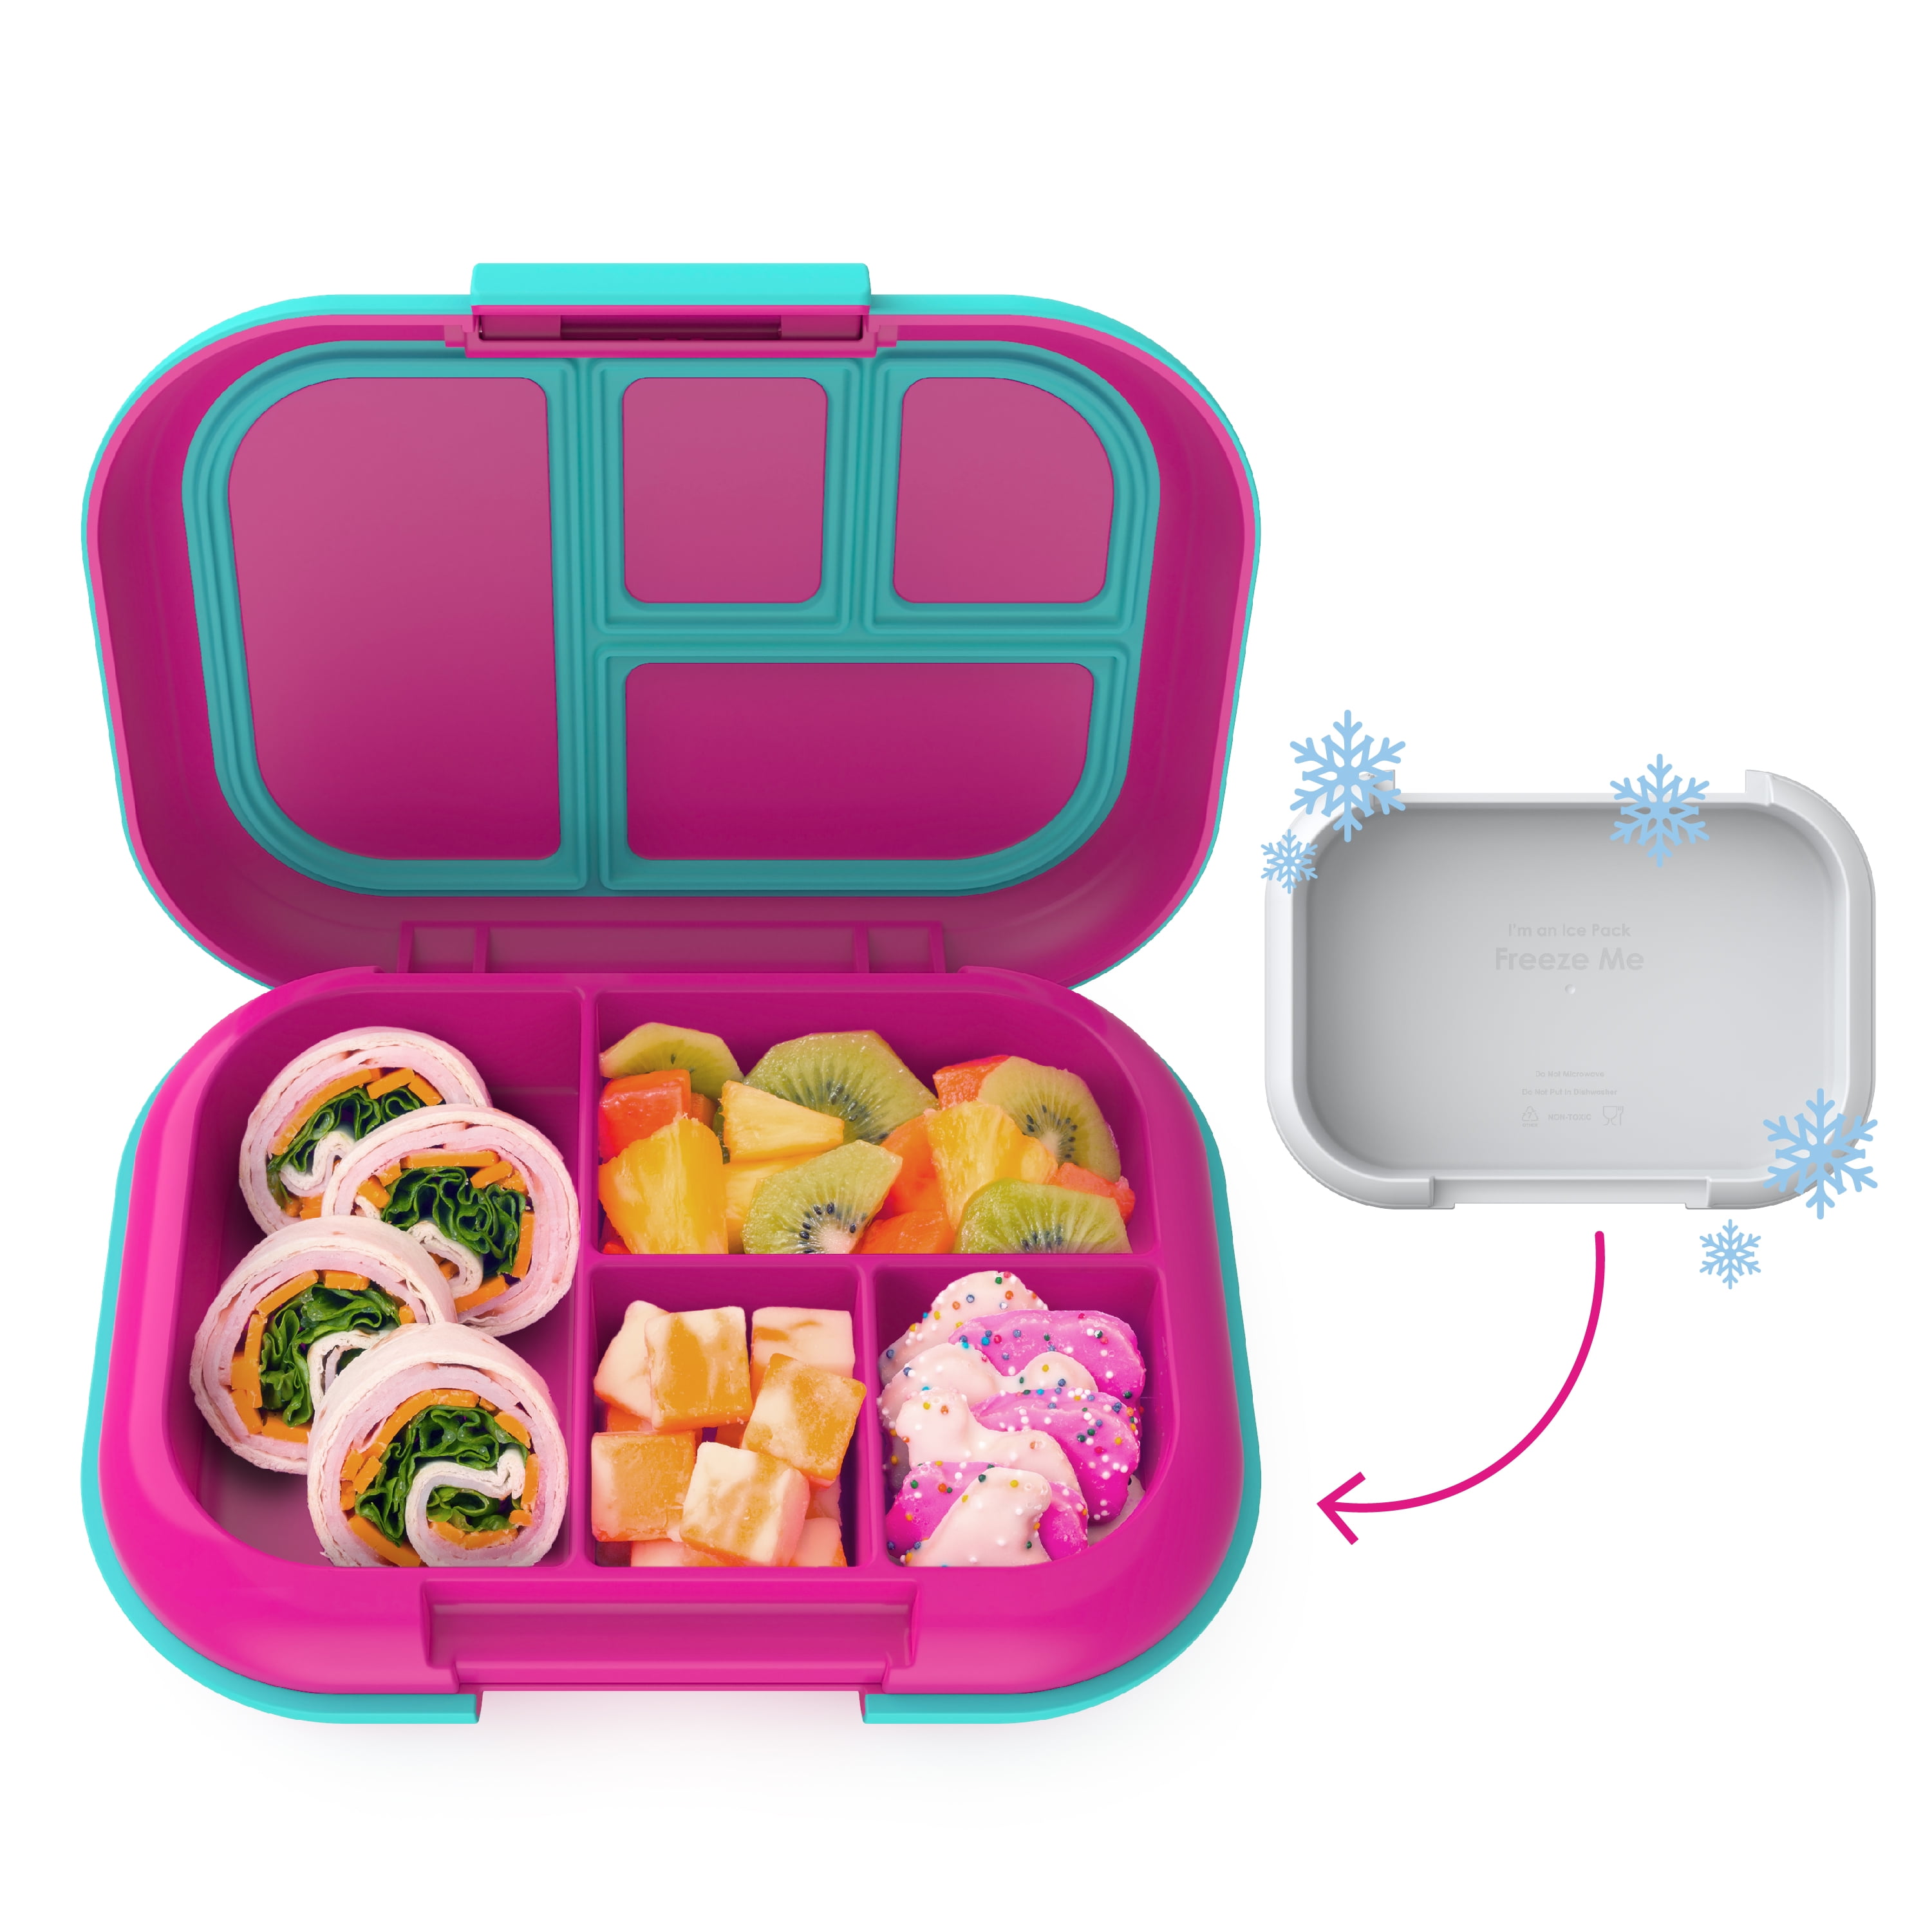 Hollywood Pink Leak-proof On-the-go Meal and Snack Packing YUMBOX Original Leakproof Bento Lunch Box Container for Kids: Bento-style lunch box offers Durable 